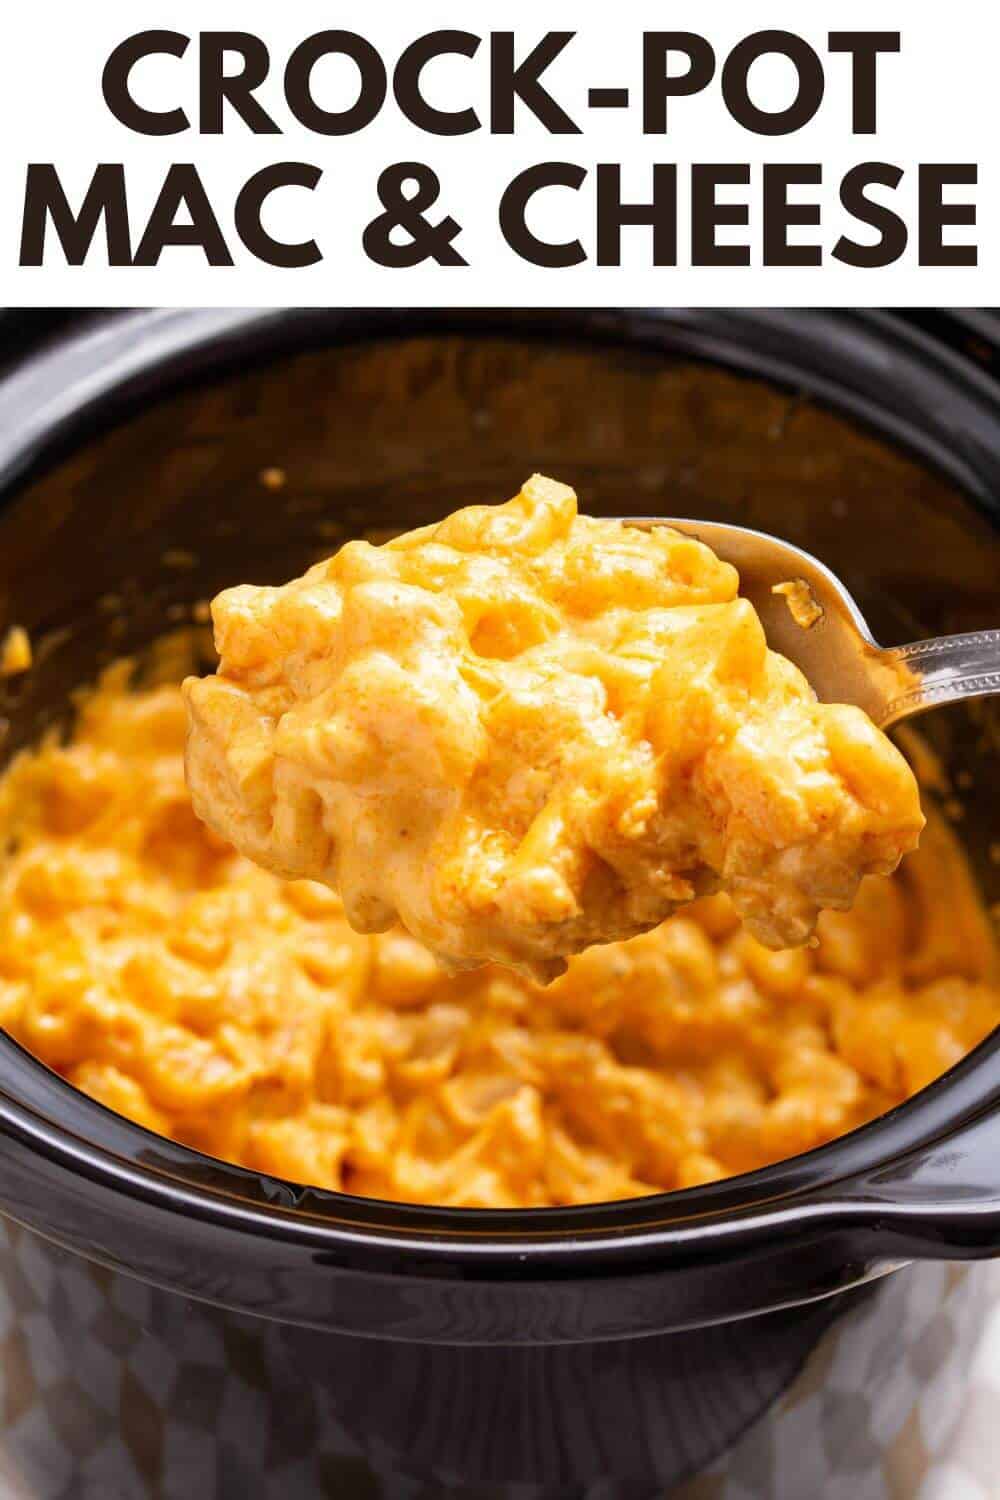 Crock pot mac and cheese with a spoon.